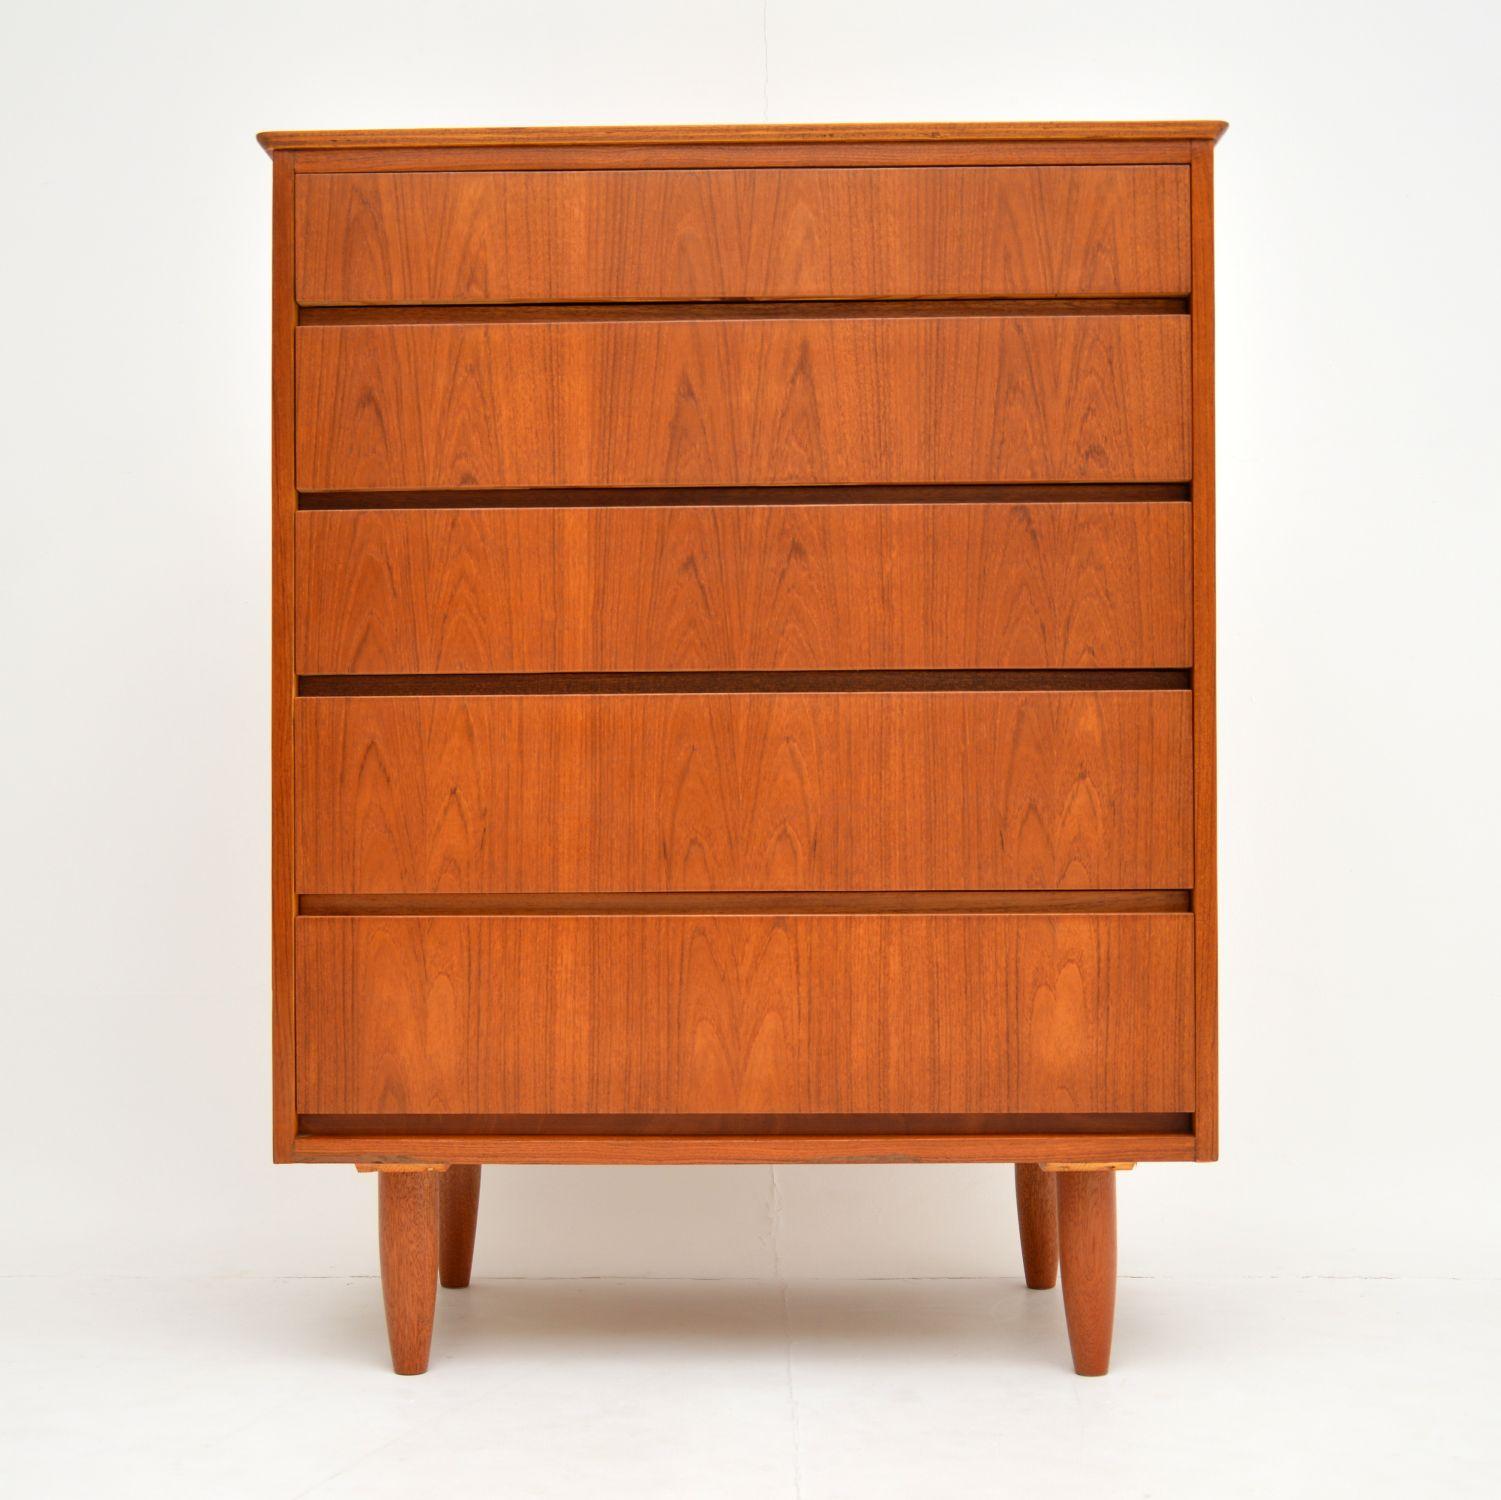 A smart and stylish vintage chest of drawers in teak, this dates from the 1960’s.

It is of nice quality and has a beautiful minimal design, with plenty of storage space.

We have had this stripped and re-polished to a very high standard, the